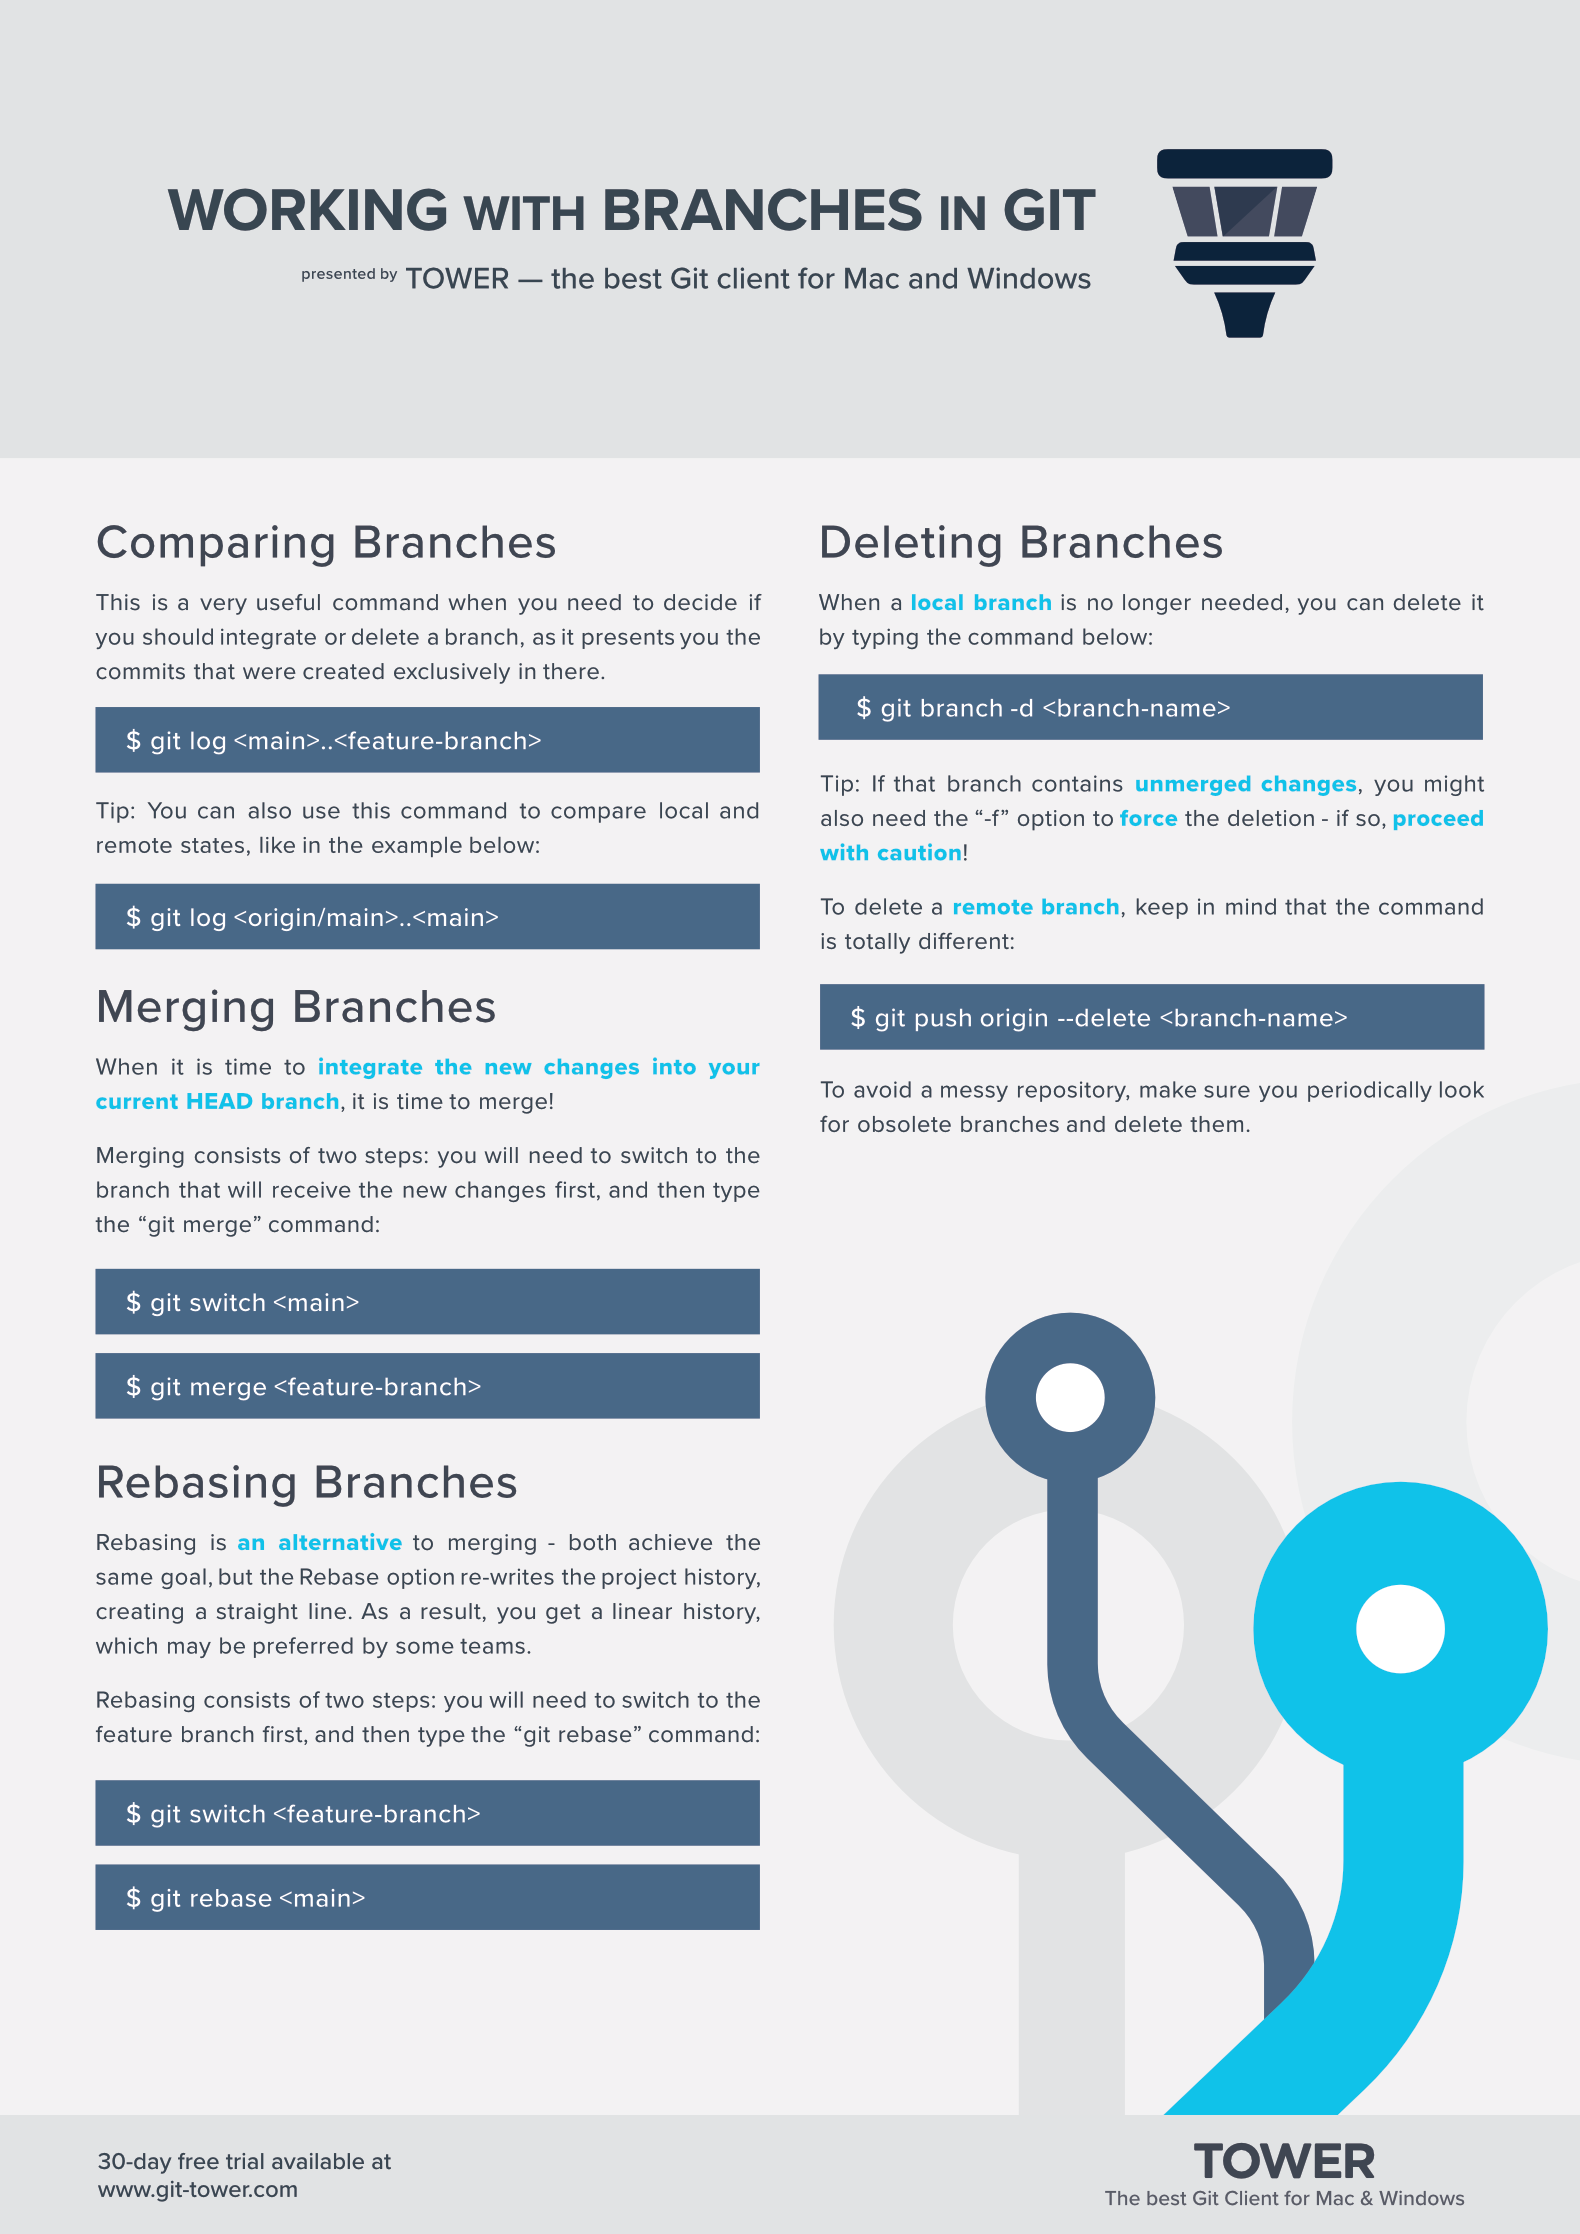 Working with Branches in Git Cheat Sheet (Page 2)